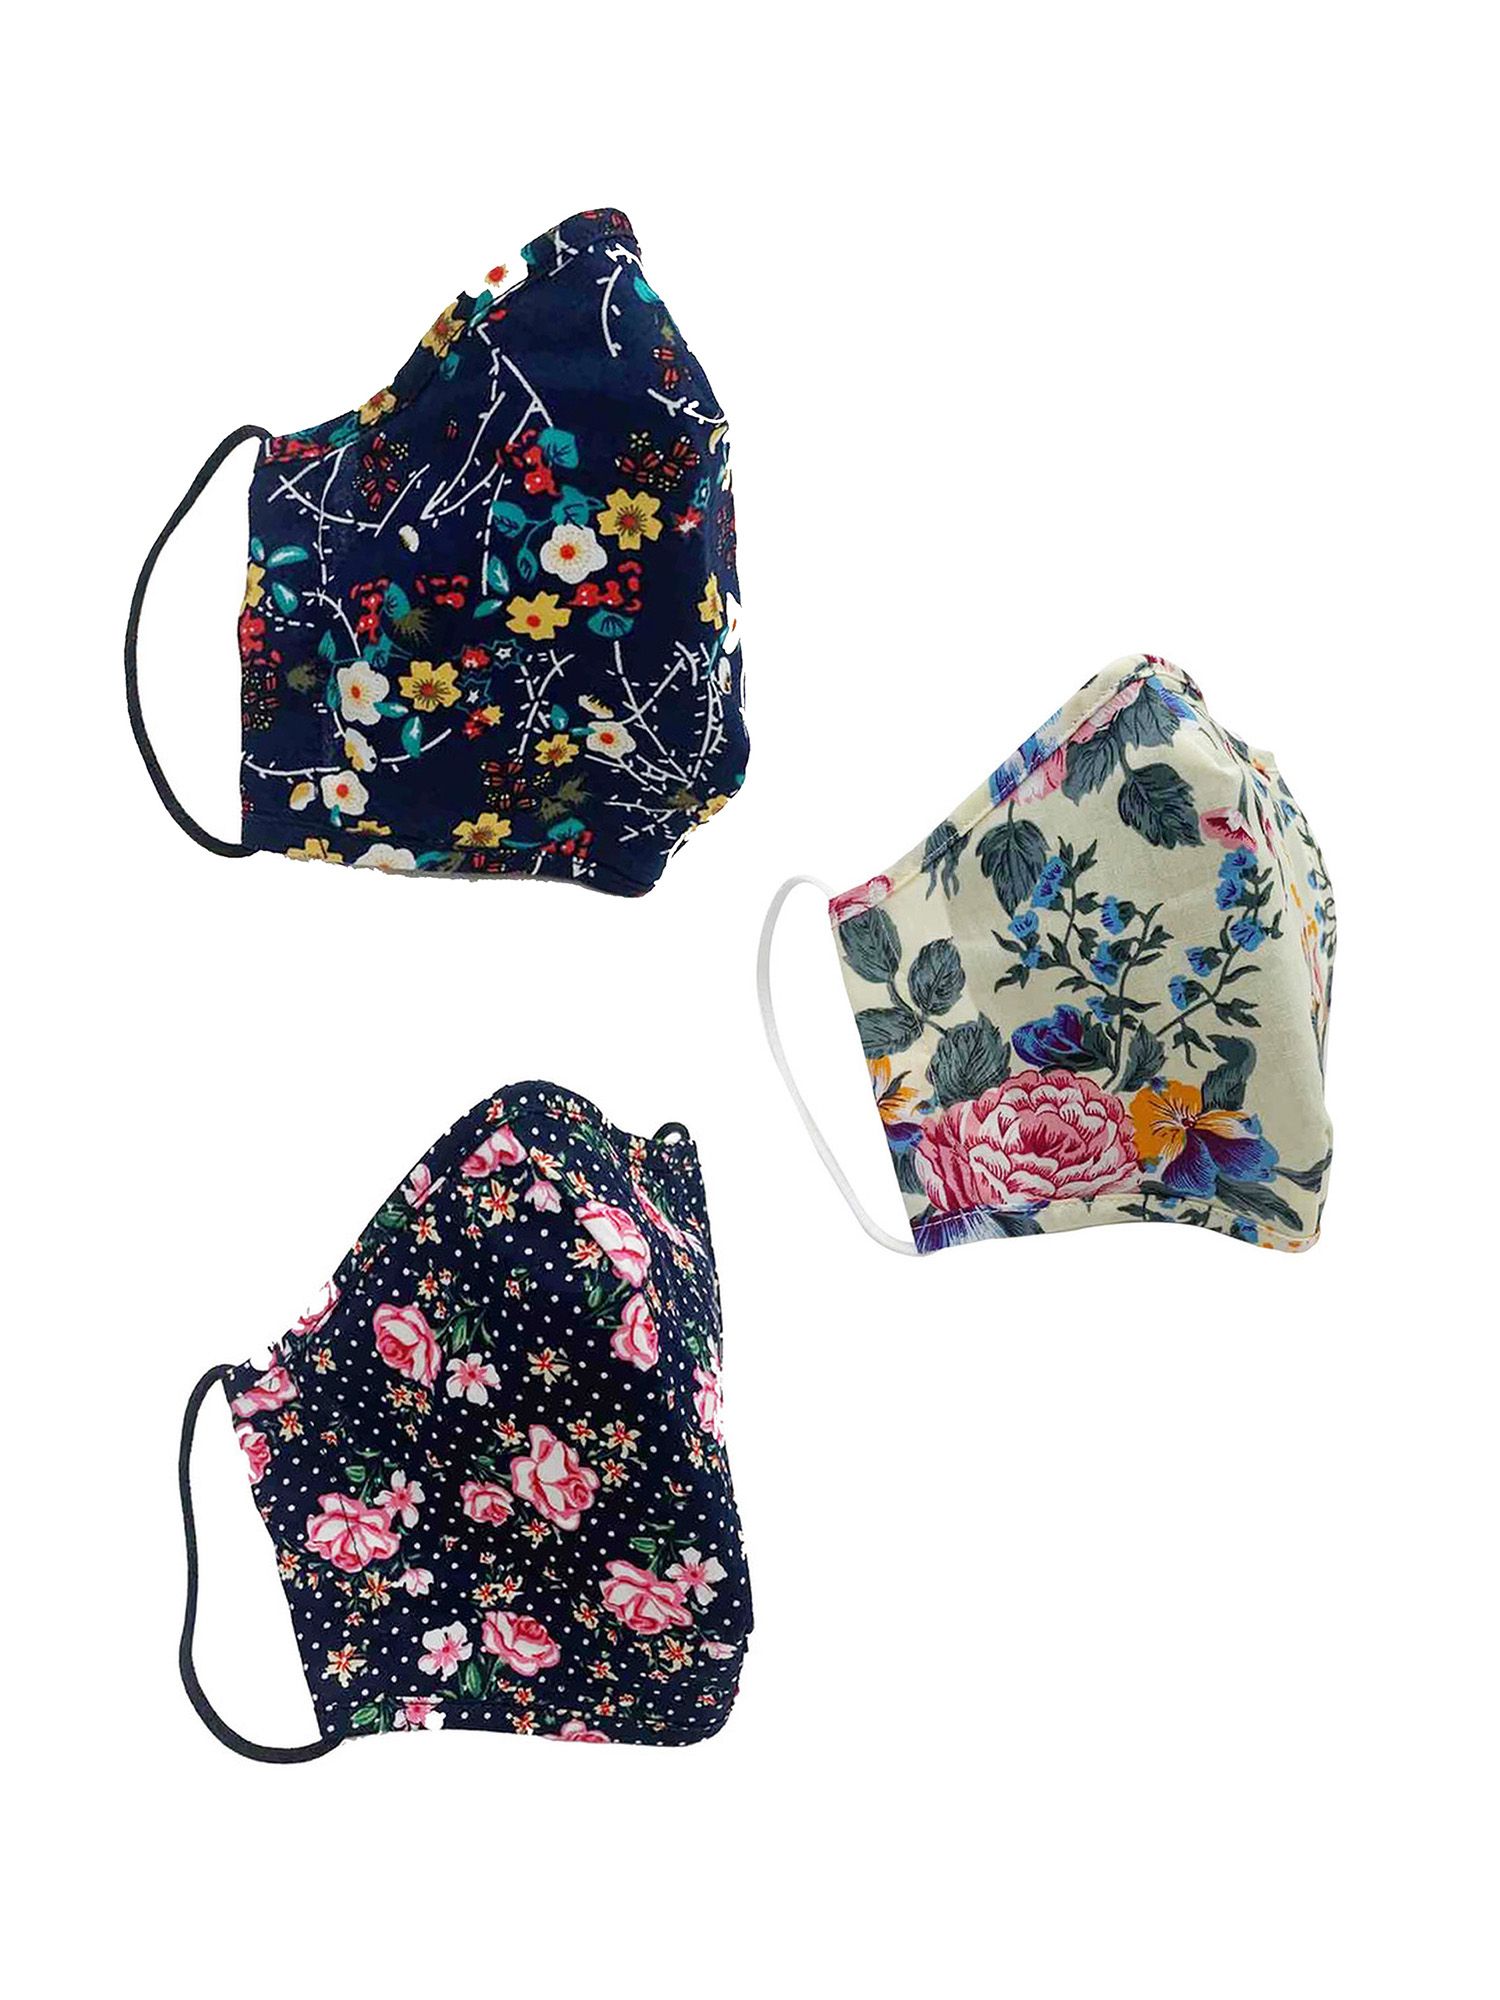 Expertly cut from super-soft cotton, our Retro Floral Face Coverings 3 Pack are perfect for showing off your style and keeping comfortable. Sourced from the ends of our fabric rolls, they are a sustainable choice and kind to the planet. Please remember these are non-medical masks and not PPE. Wash your hands before and after putting on the covering. One Poundfrom each covering is donated to Sufra, a charity that supports and provides food for people in extreme poverty.